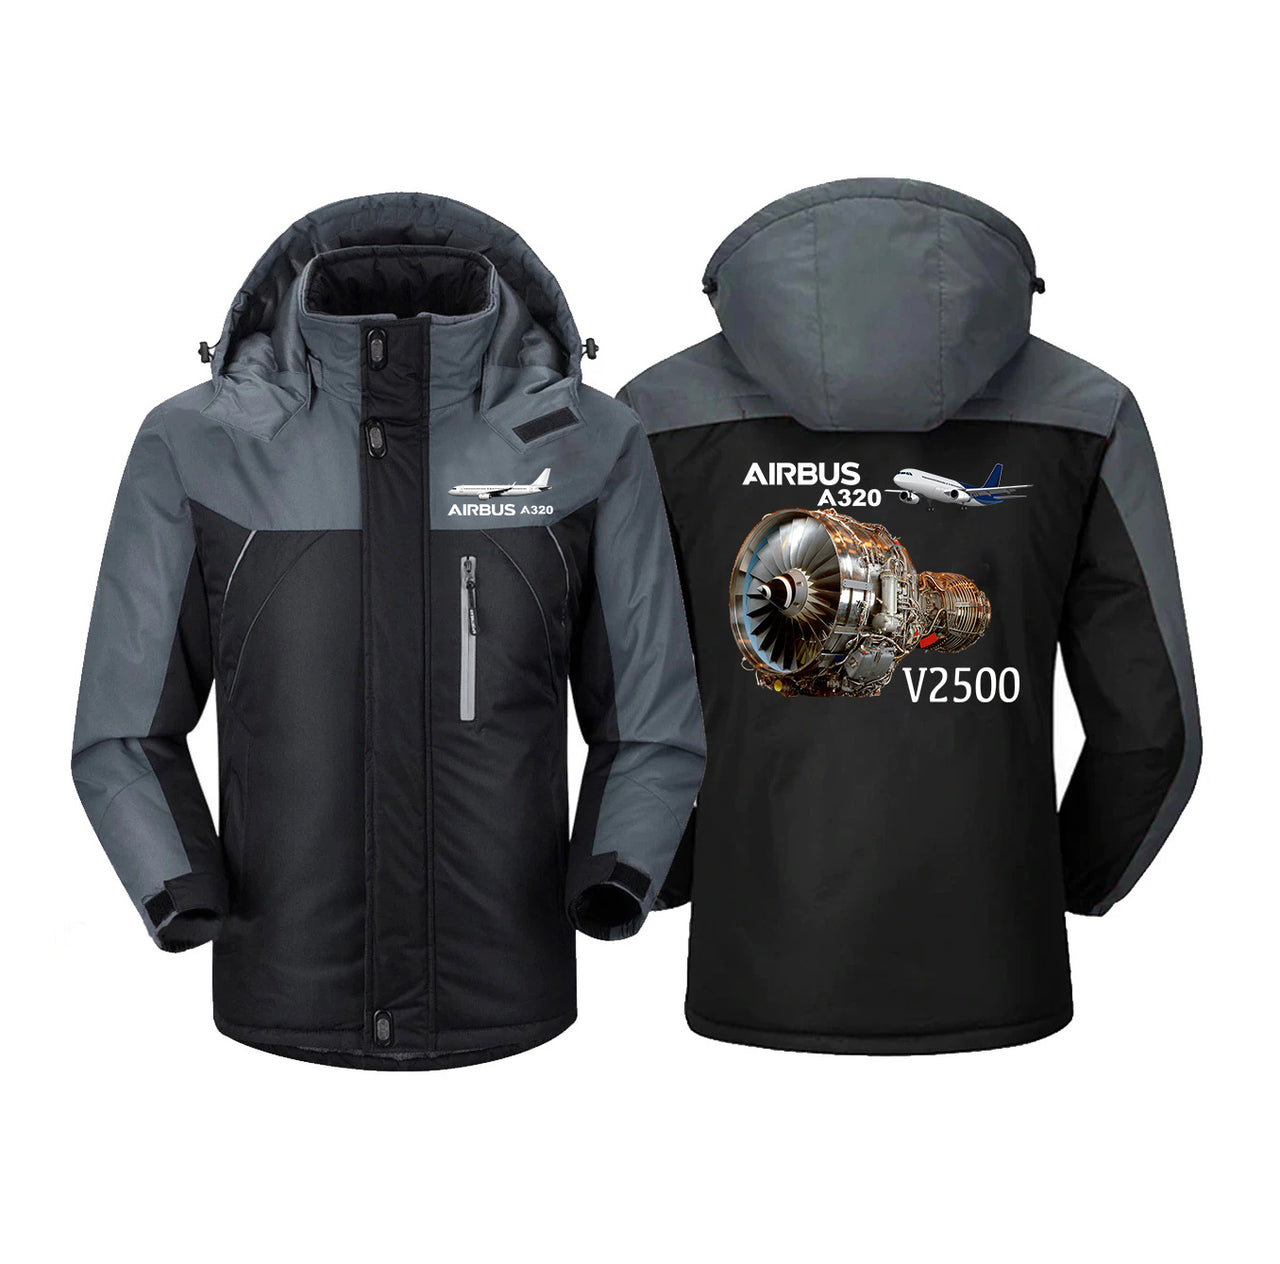 Airbus A320 & V2500 Engine Designed Thick Winter Jackets